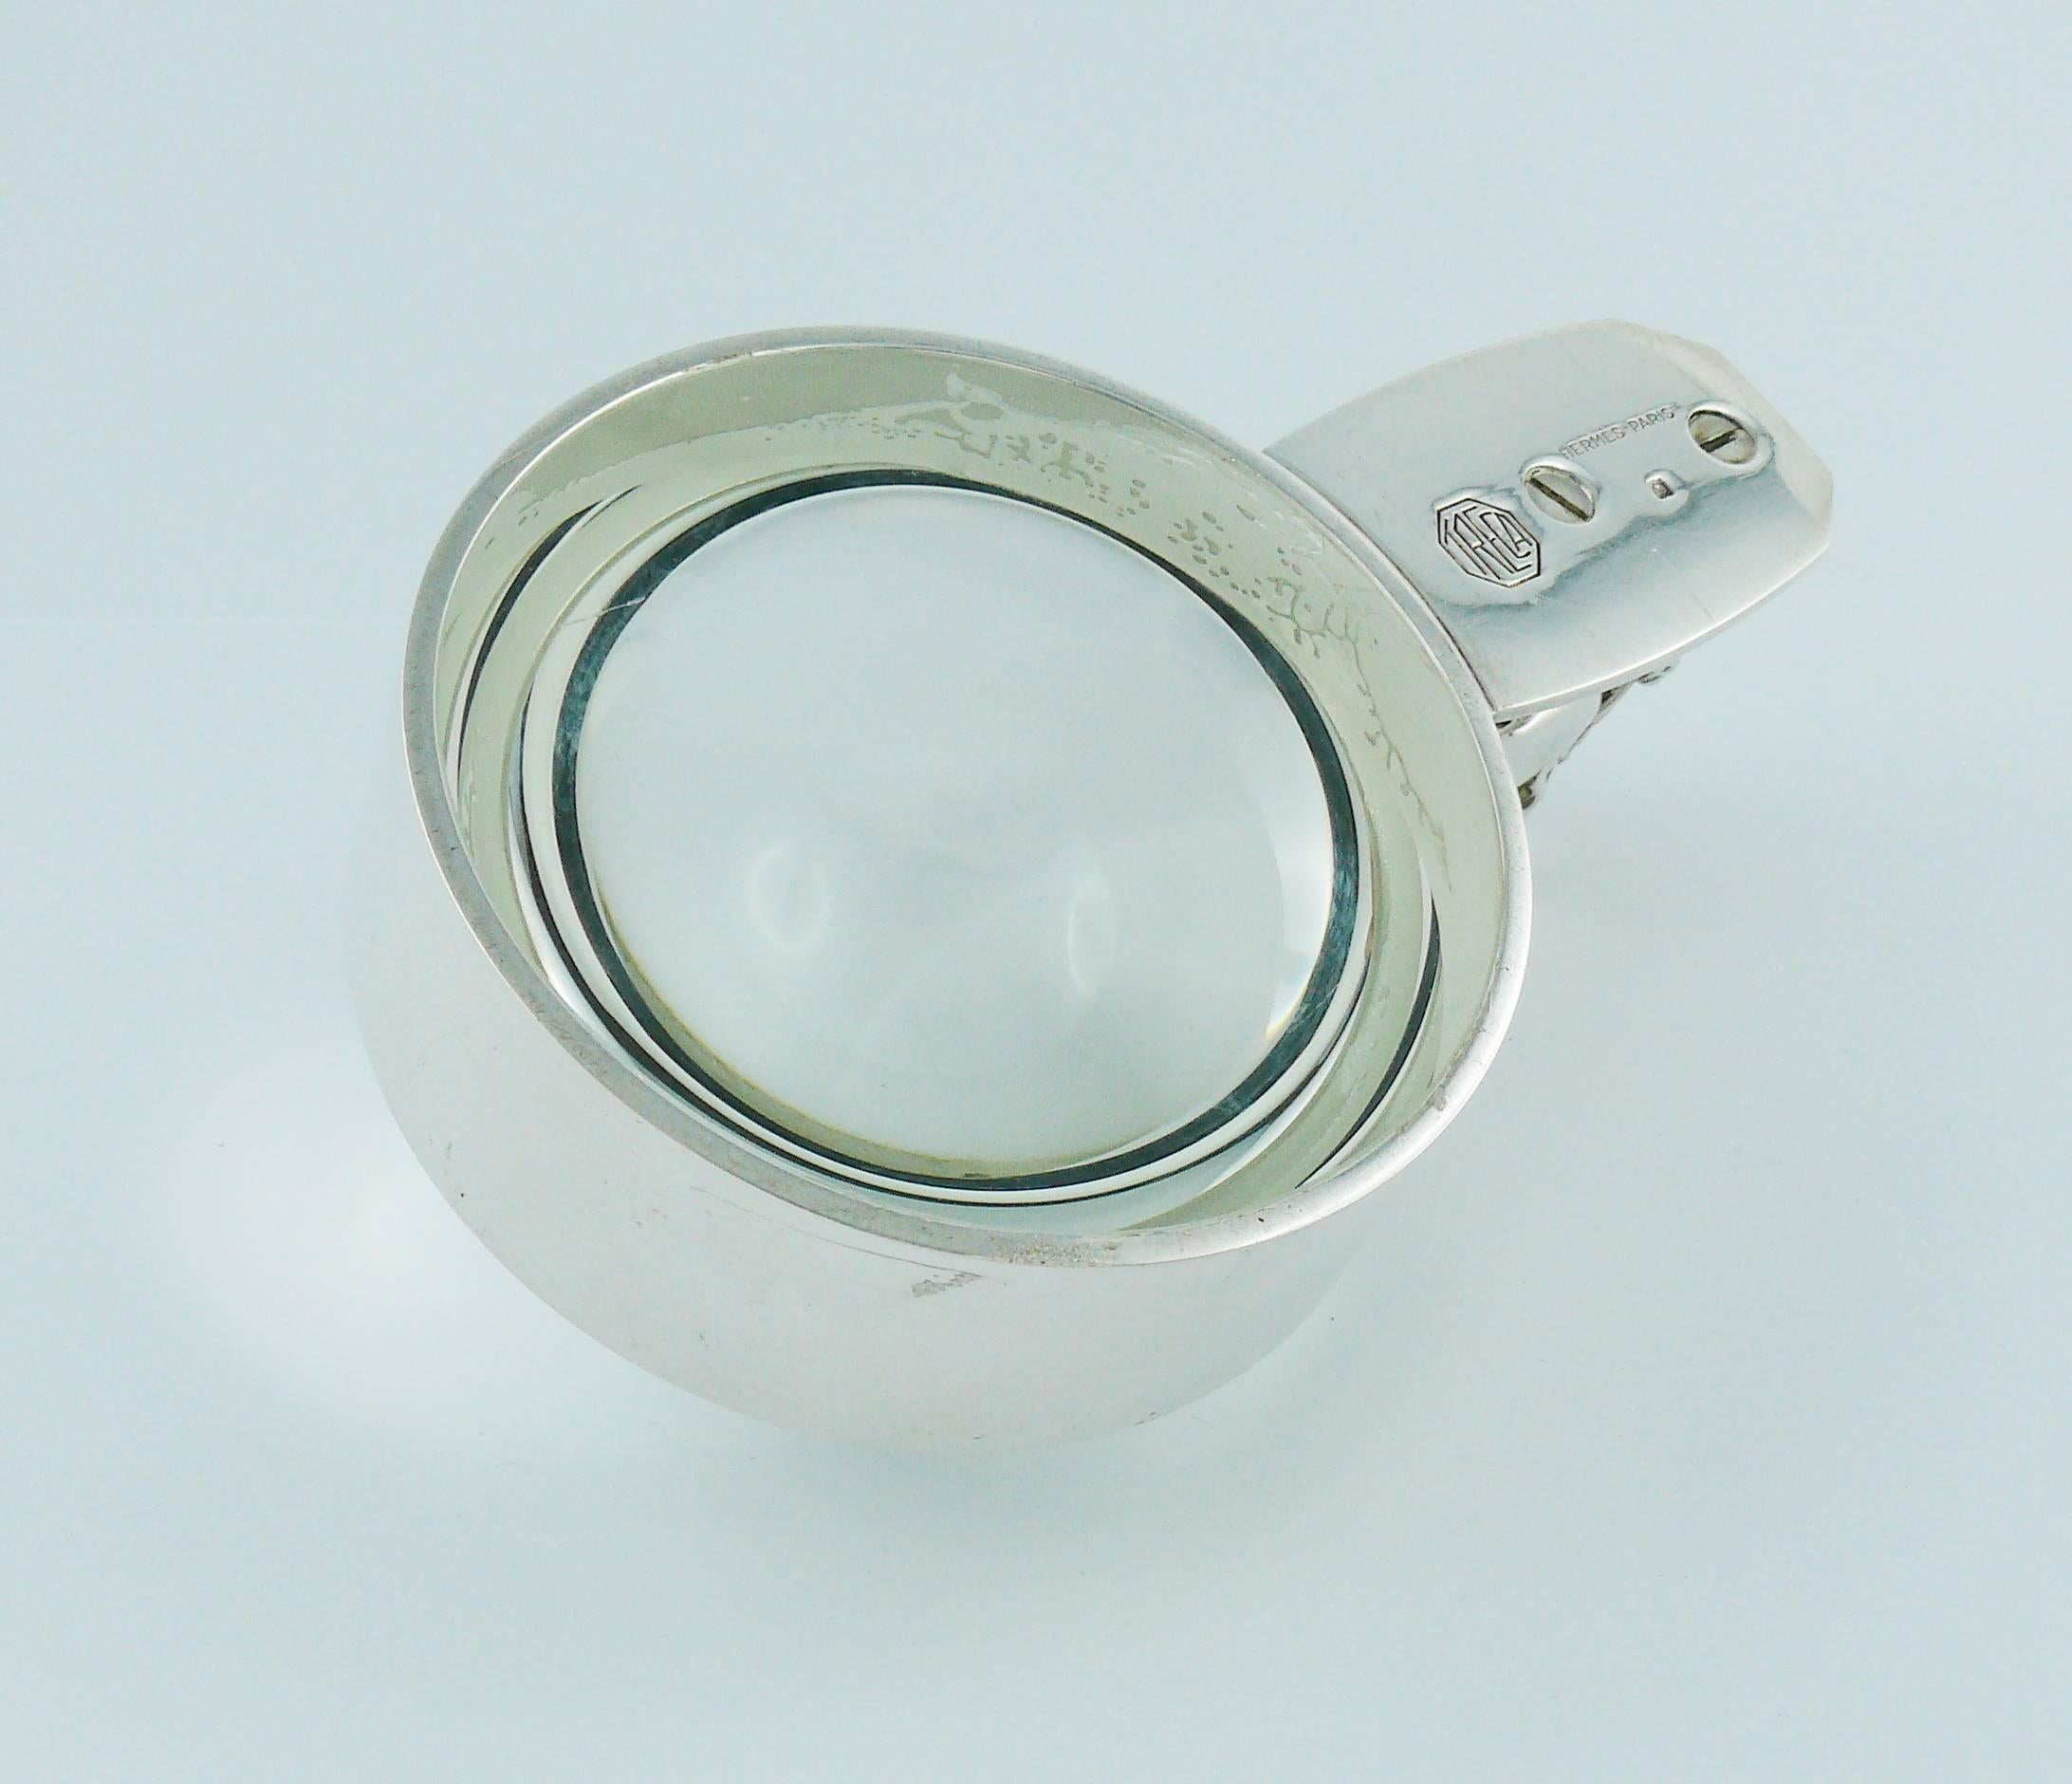 Hermes Vintage Equestrian Silver Plated Desk Paperweight Magnifier 4